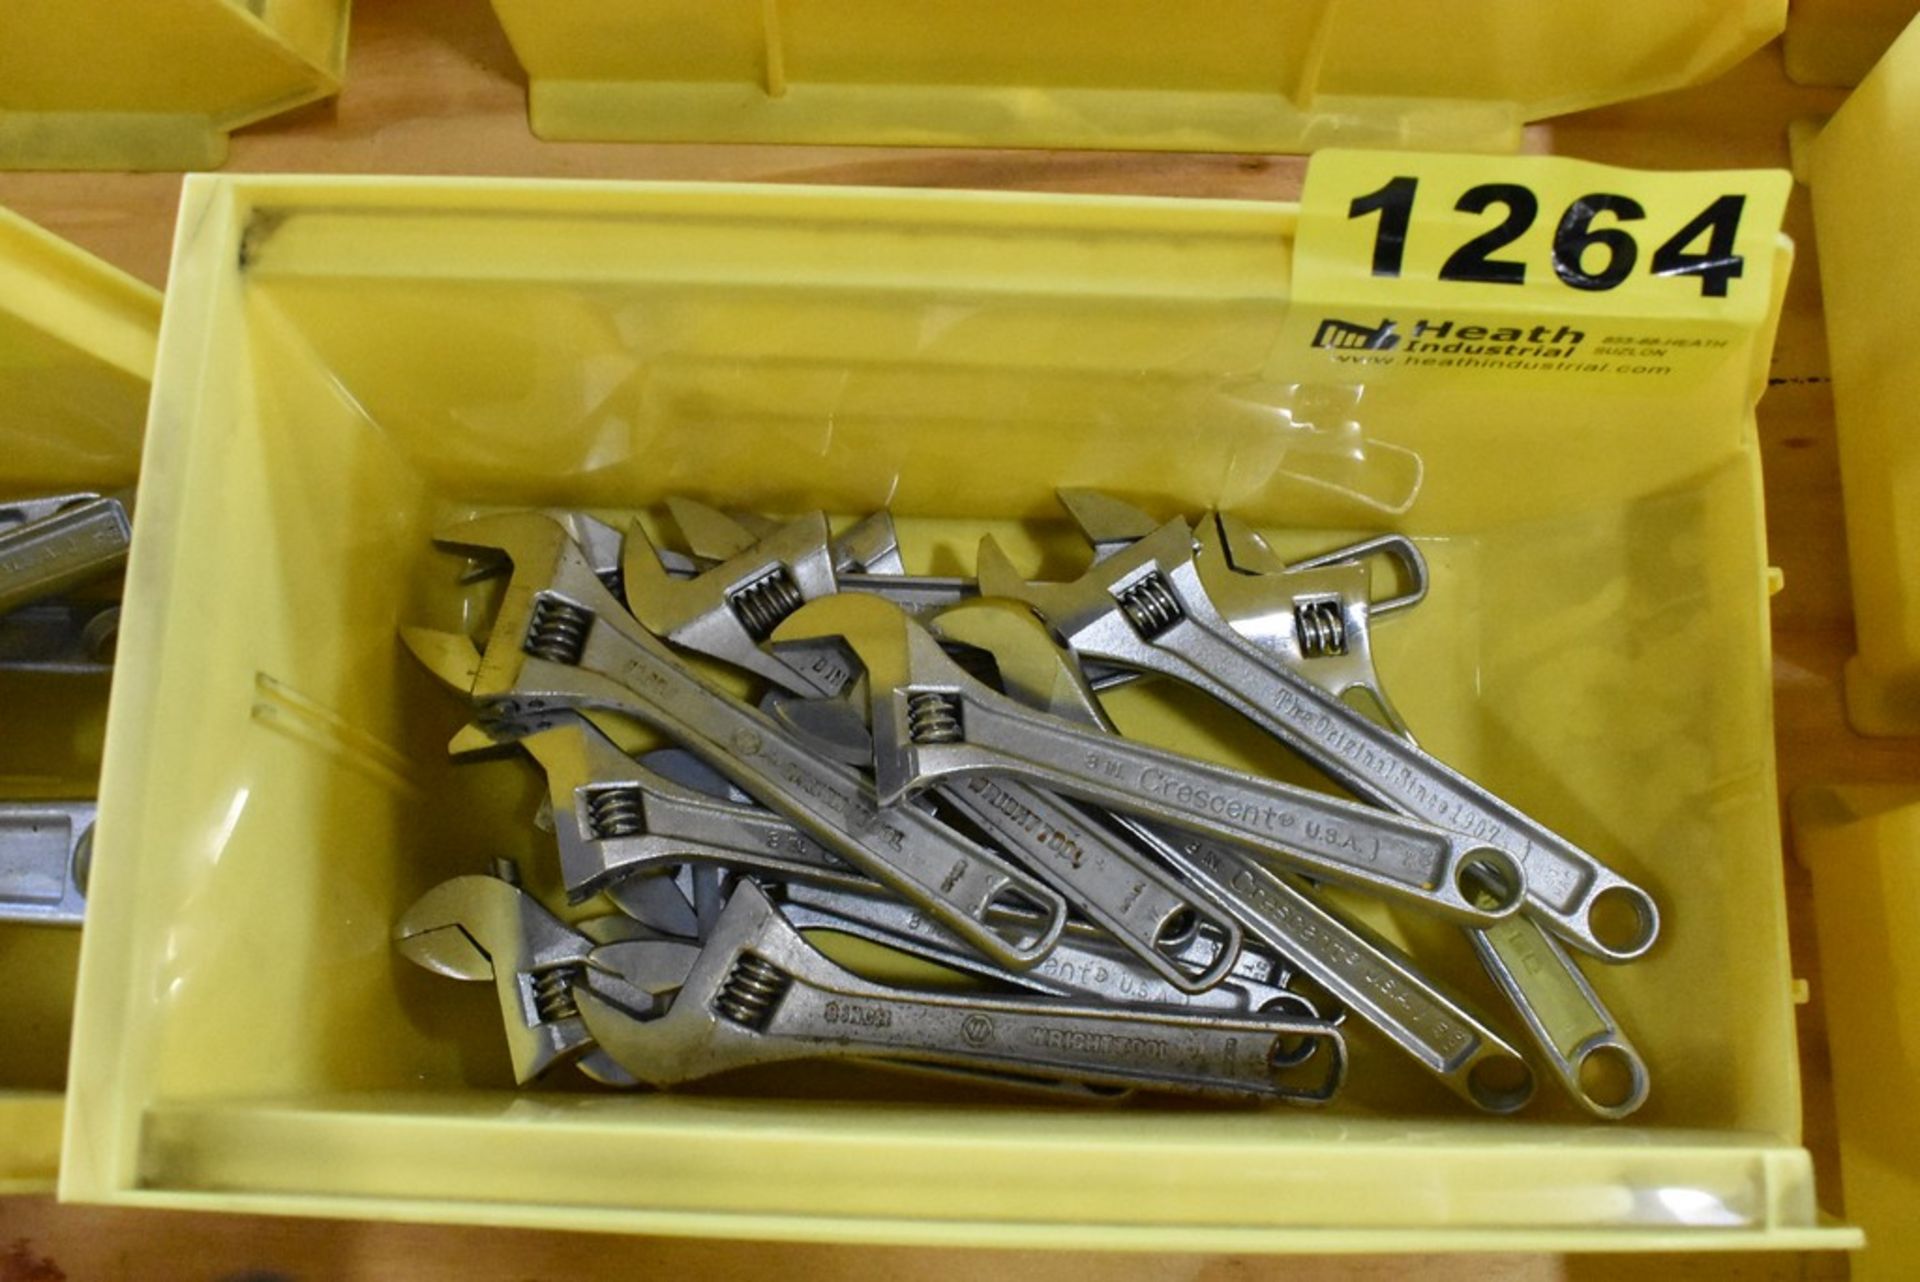 LARGE QTY OF ASSORTED CRESCENT WRENCHES